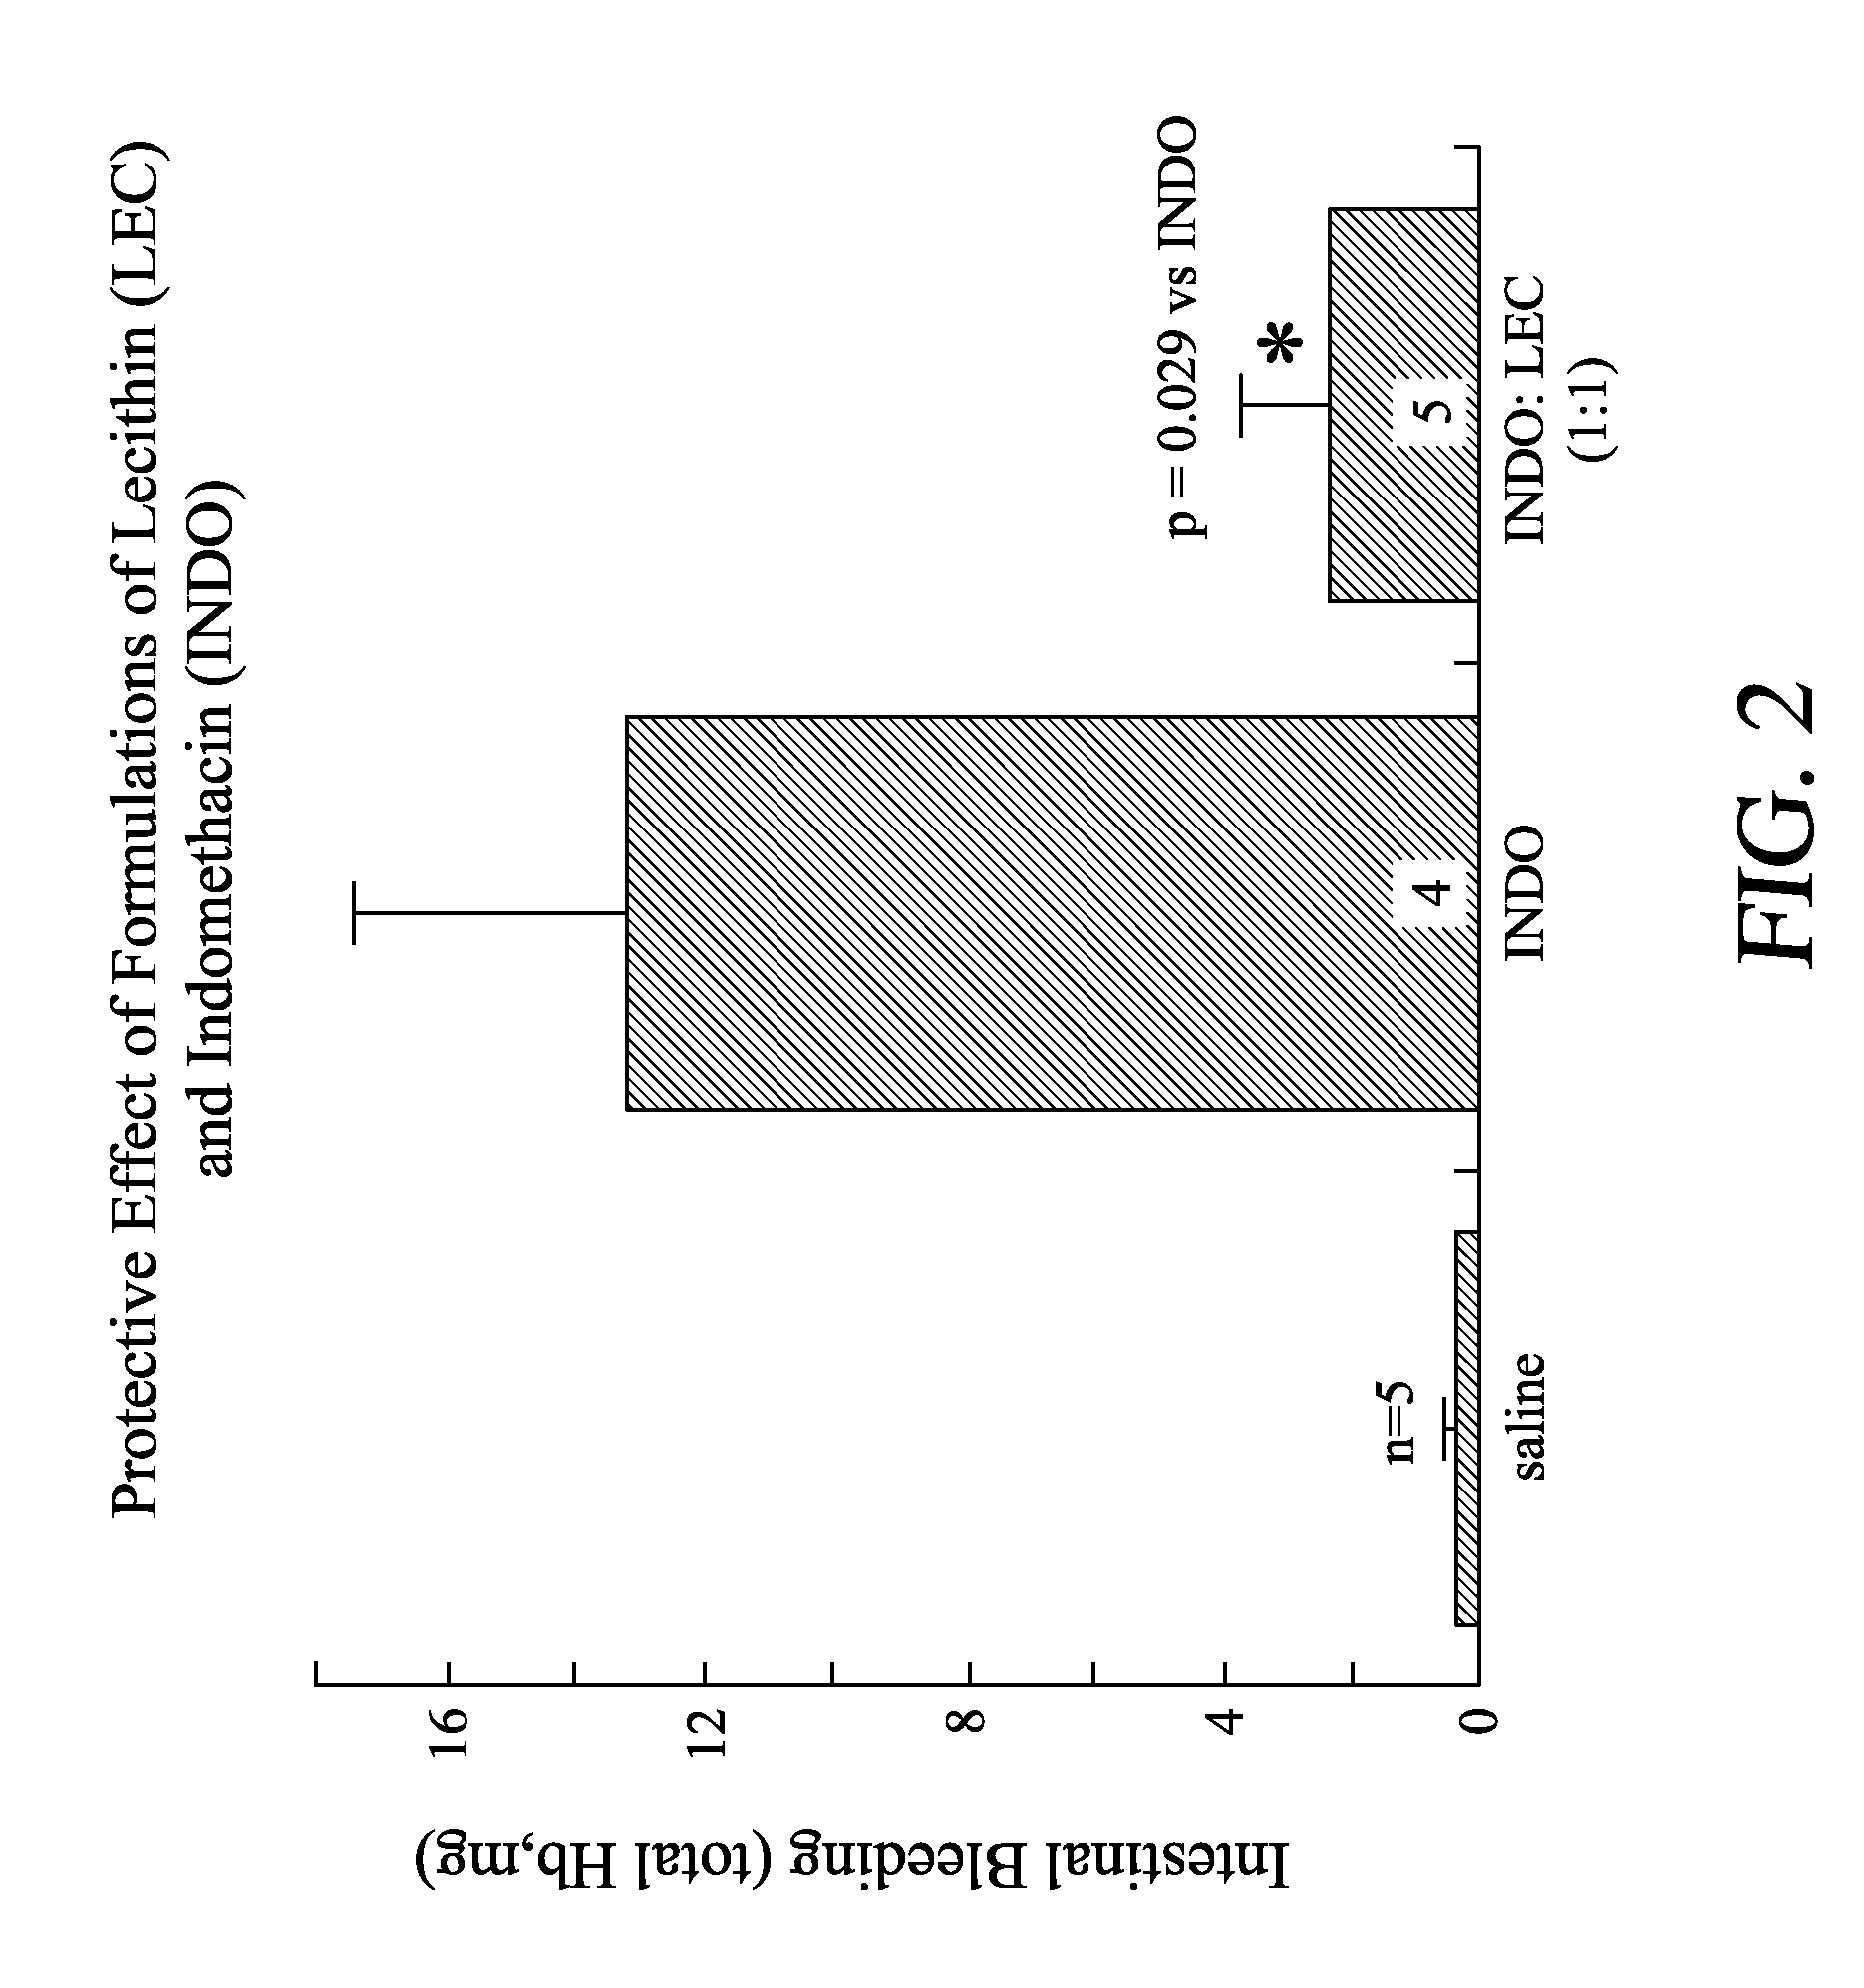 Methods of Treating Inflammation with Compositions Comprising Lecithin Oils and NSAIDS for Protecting the Gastrointestinal Tract and Providing Enhanced Therapeutic Activity